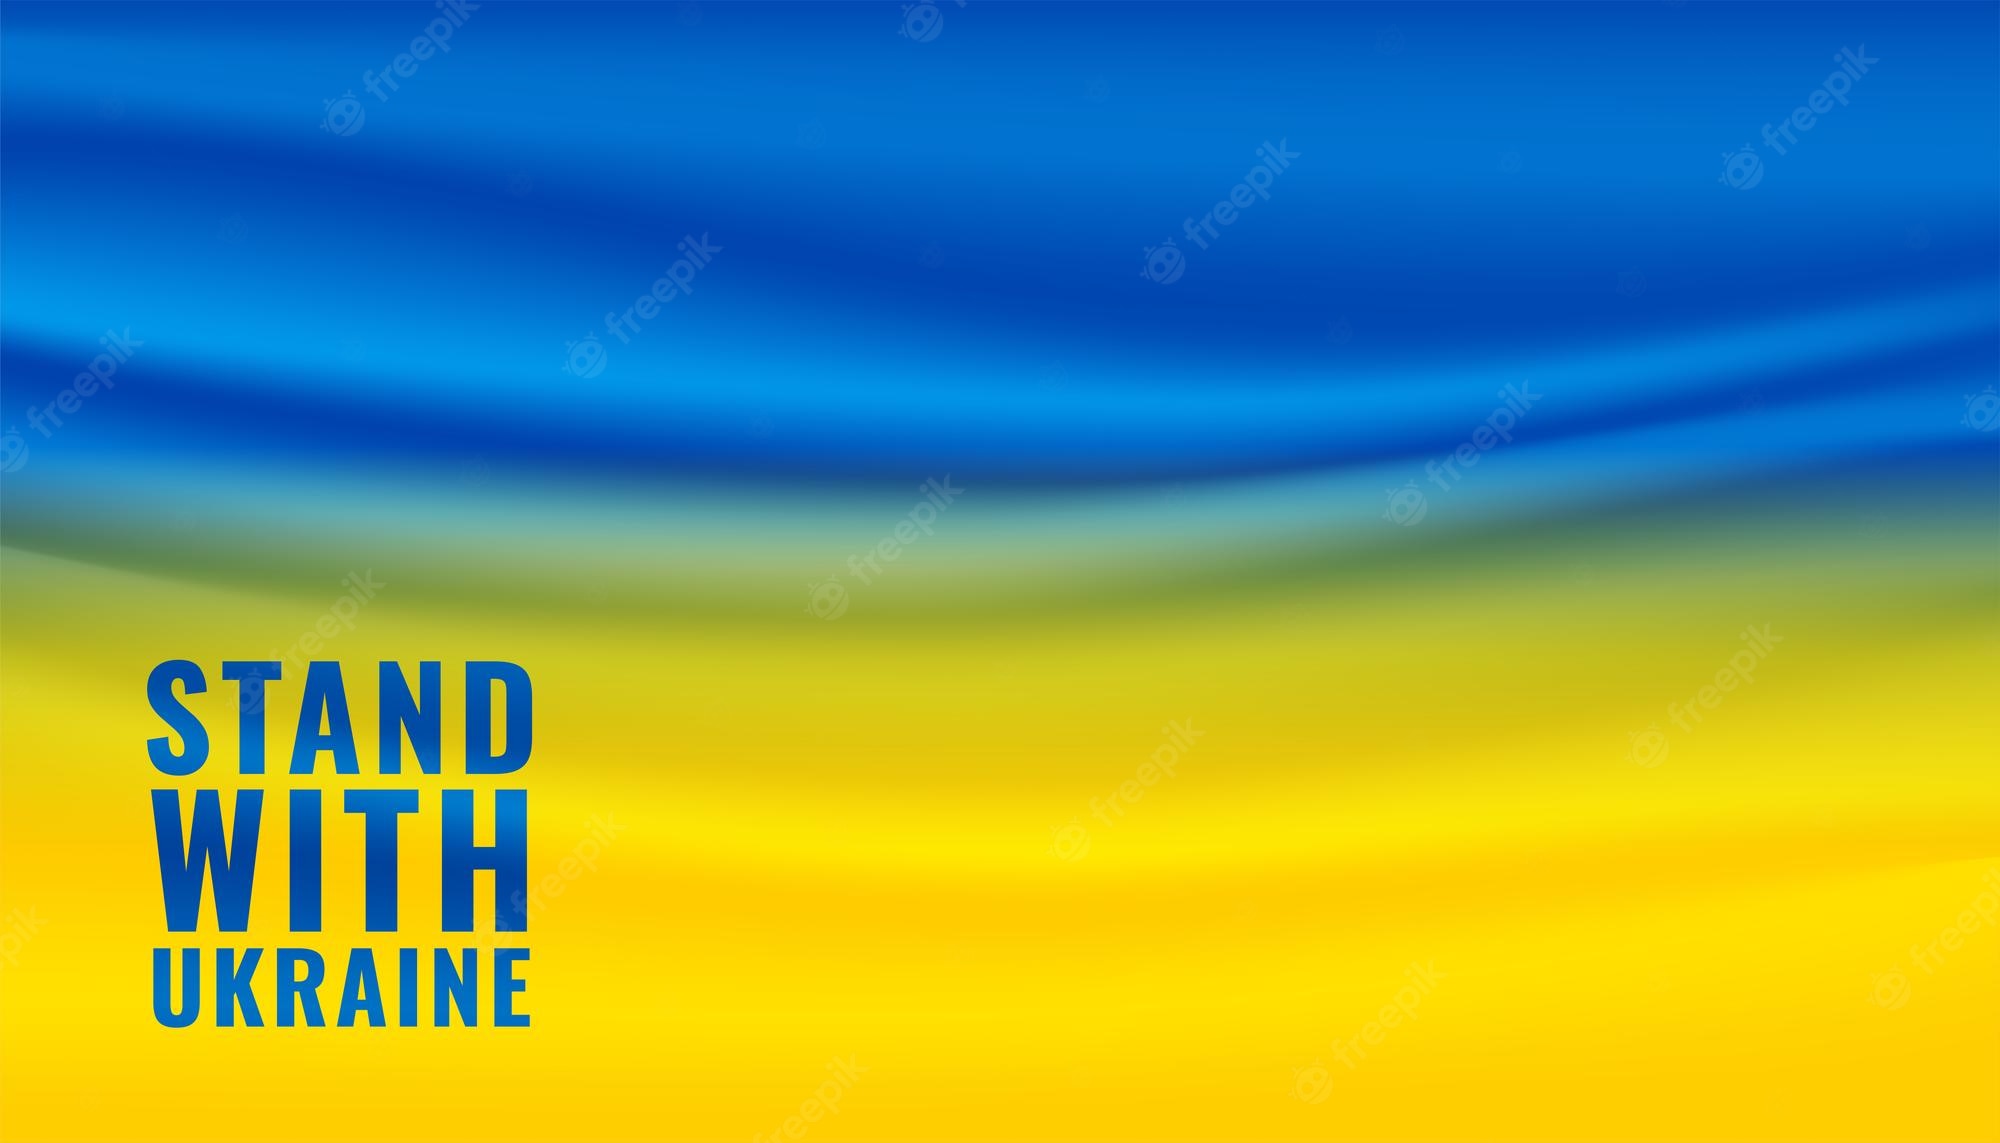 Free Vector. Stand with ukraine message on flag